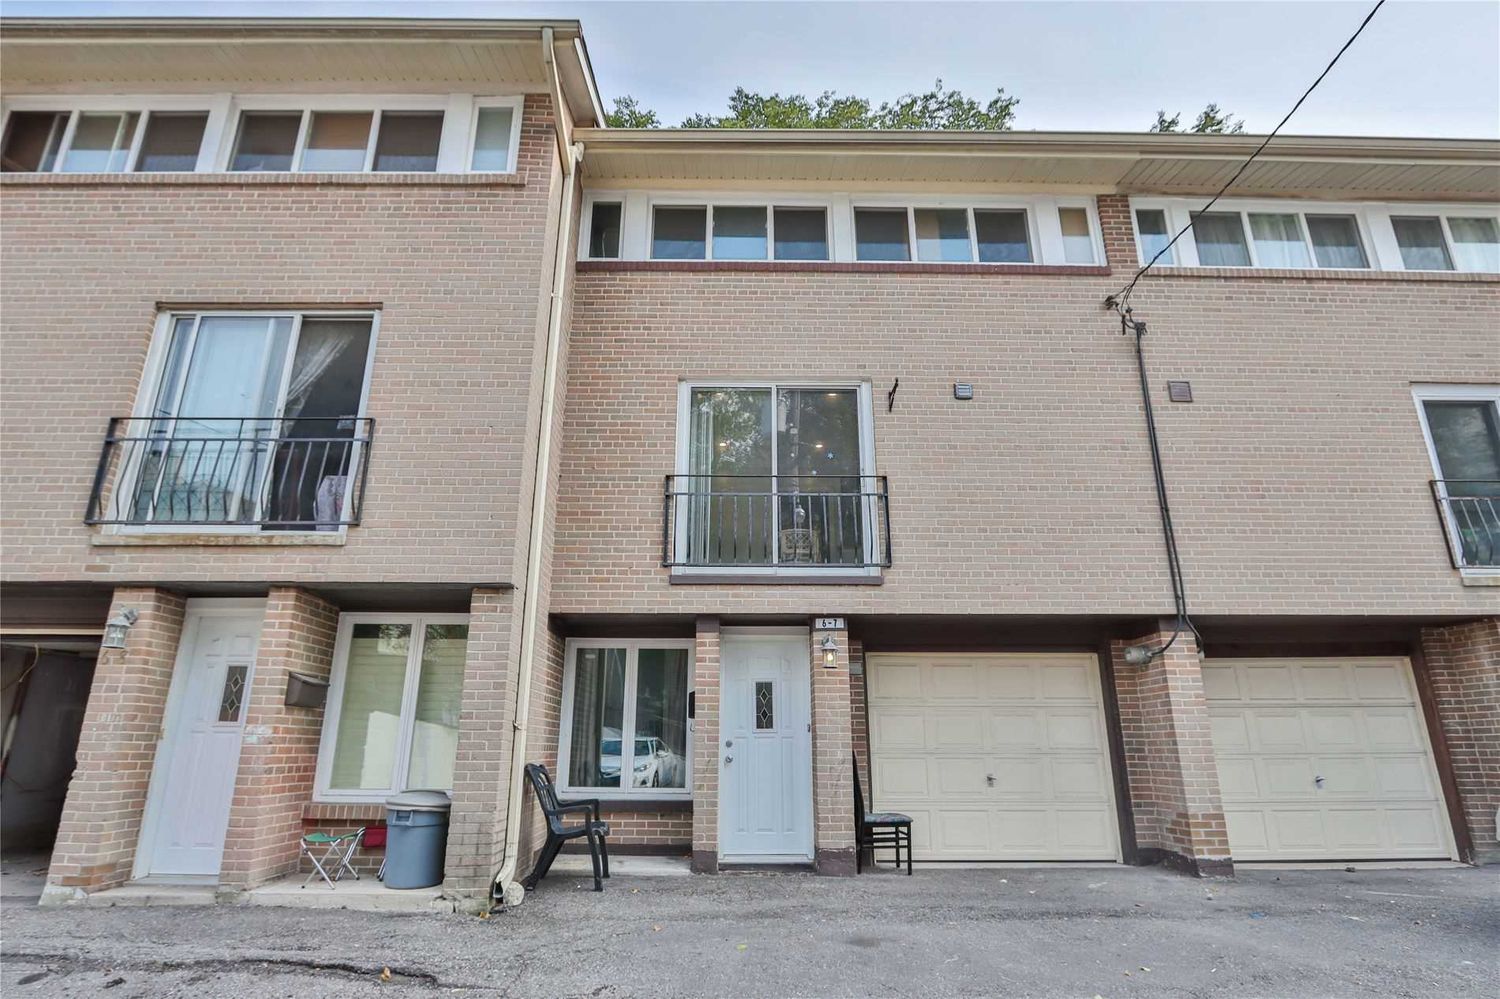 2-28 Streamdale Court. 17 Brookwell Drive Townhouses is located in  North York, Toronto - image #2 of 2